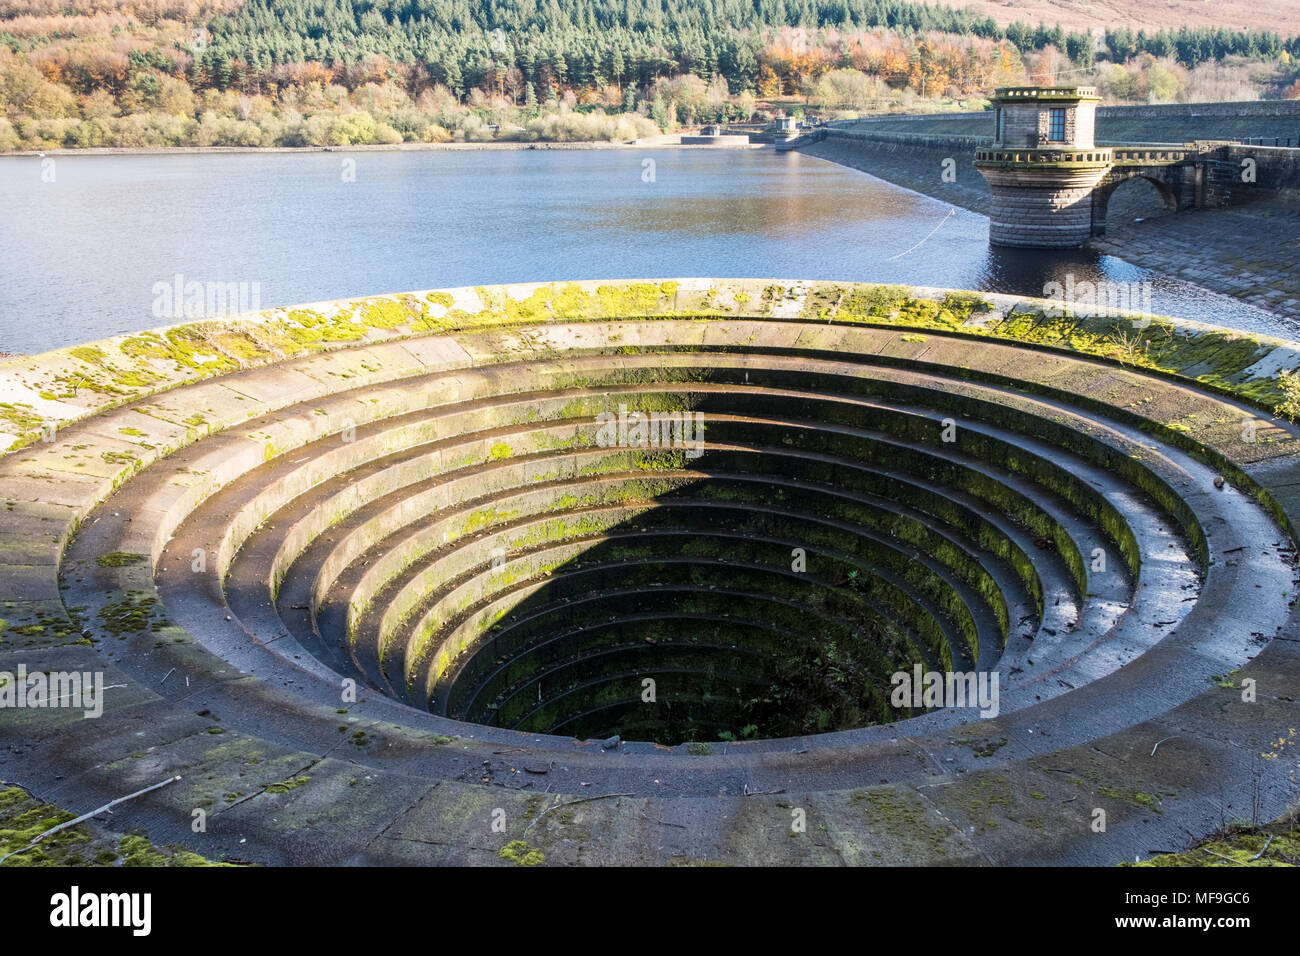 A bell mouth overflow (locally referred to as a plug hole) at Ladybower Reservoir with dam and draw off towers in the distance, Derbyshire, England, UK Stock Photo